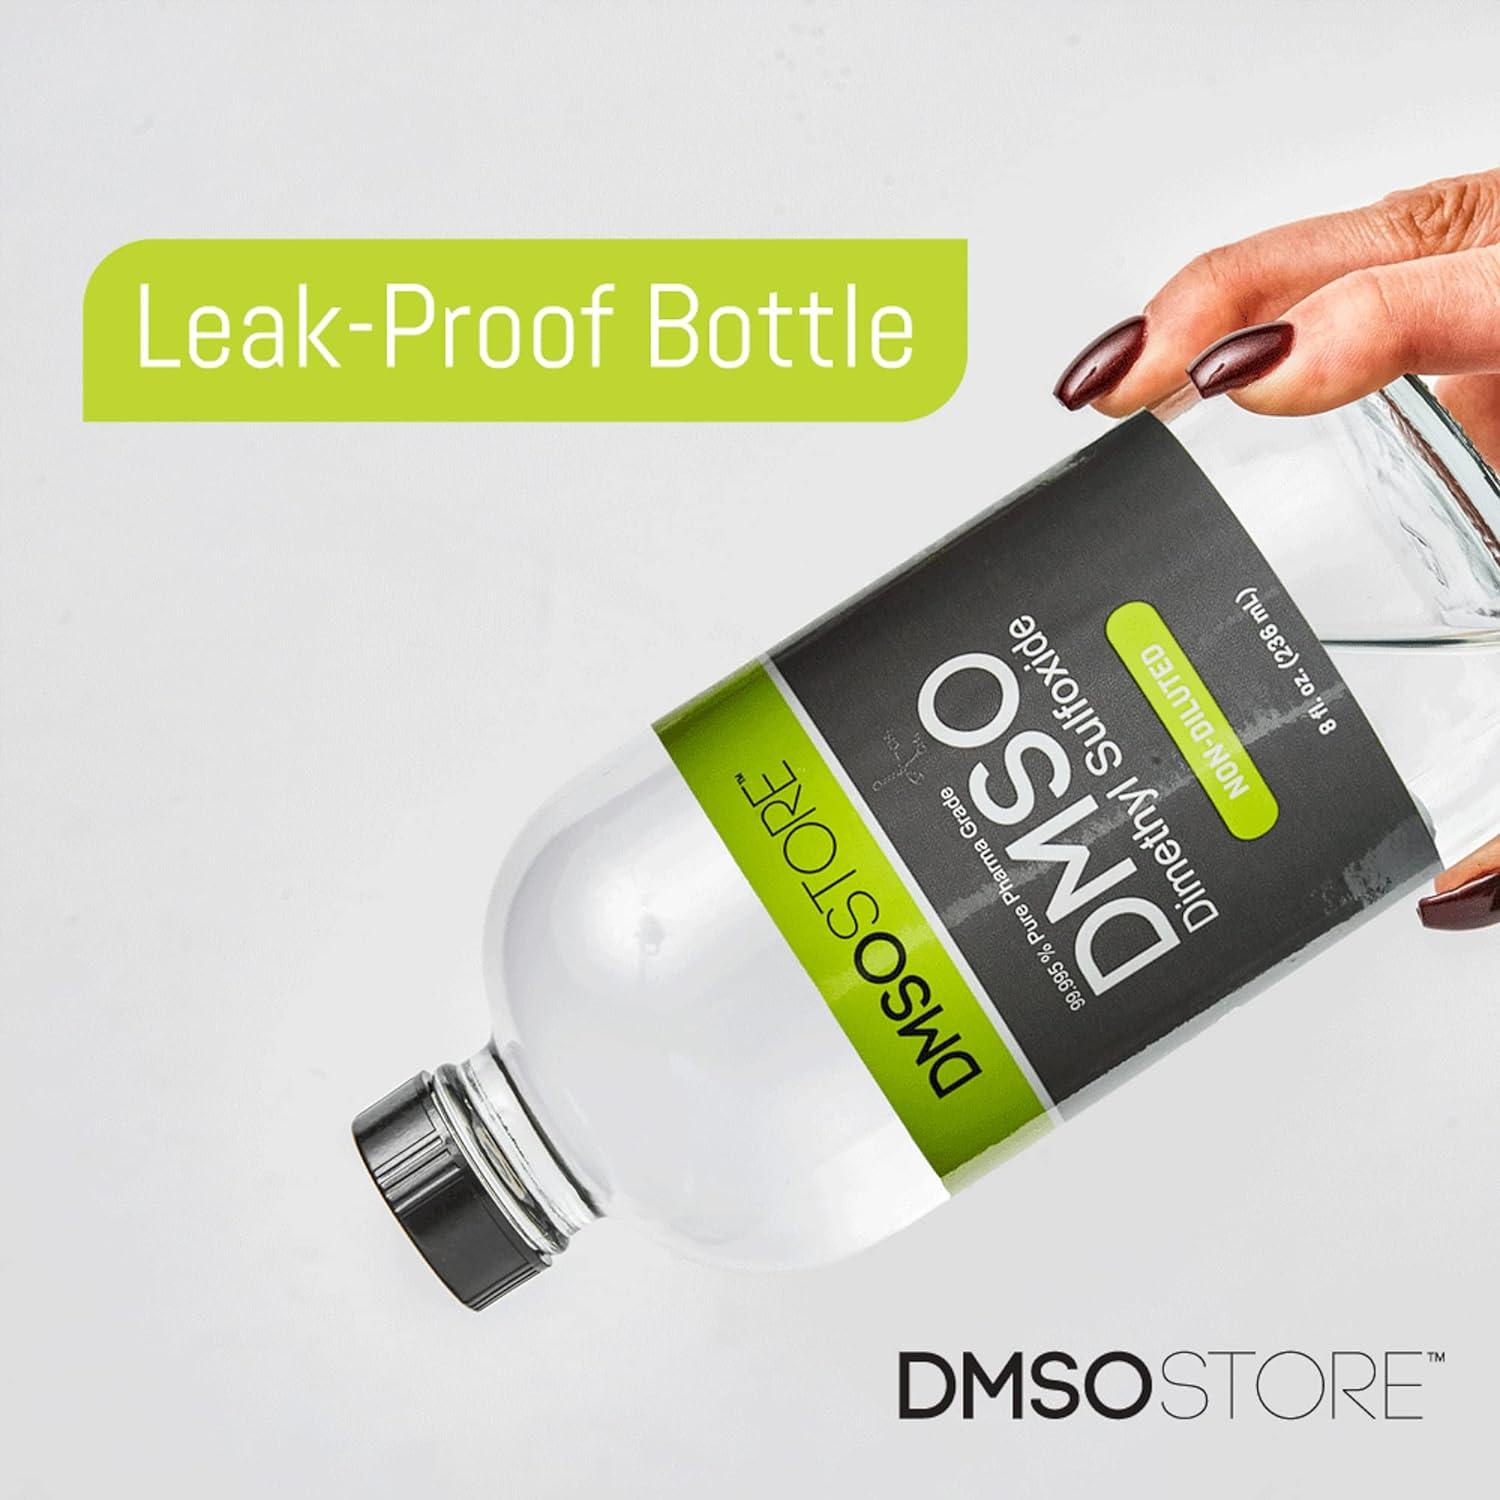 DMSO 8 oz. Liquid in a Glass Bottle Pure 99.995% Pharma Grade Non-Diluted  Low Odor Dimethyl Sulfoxide